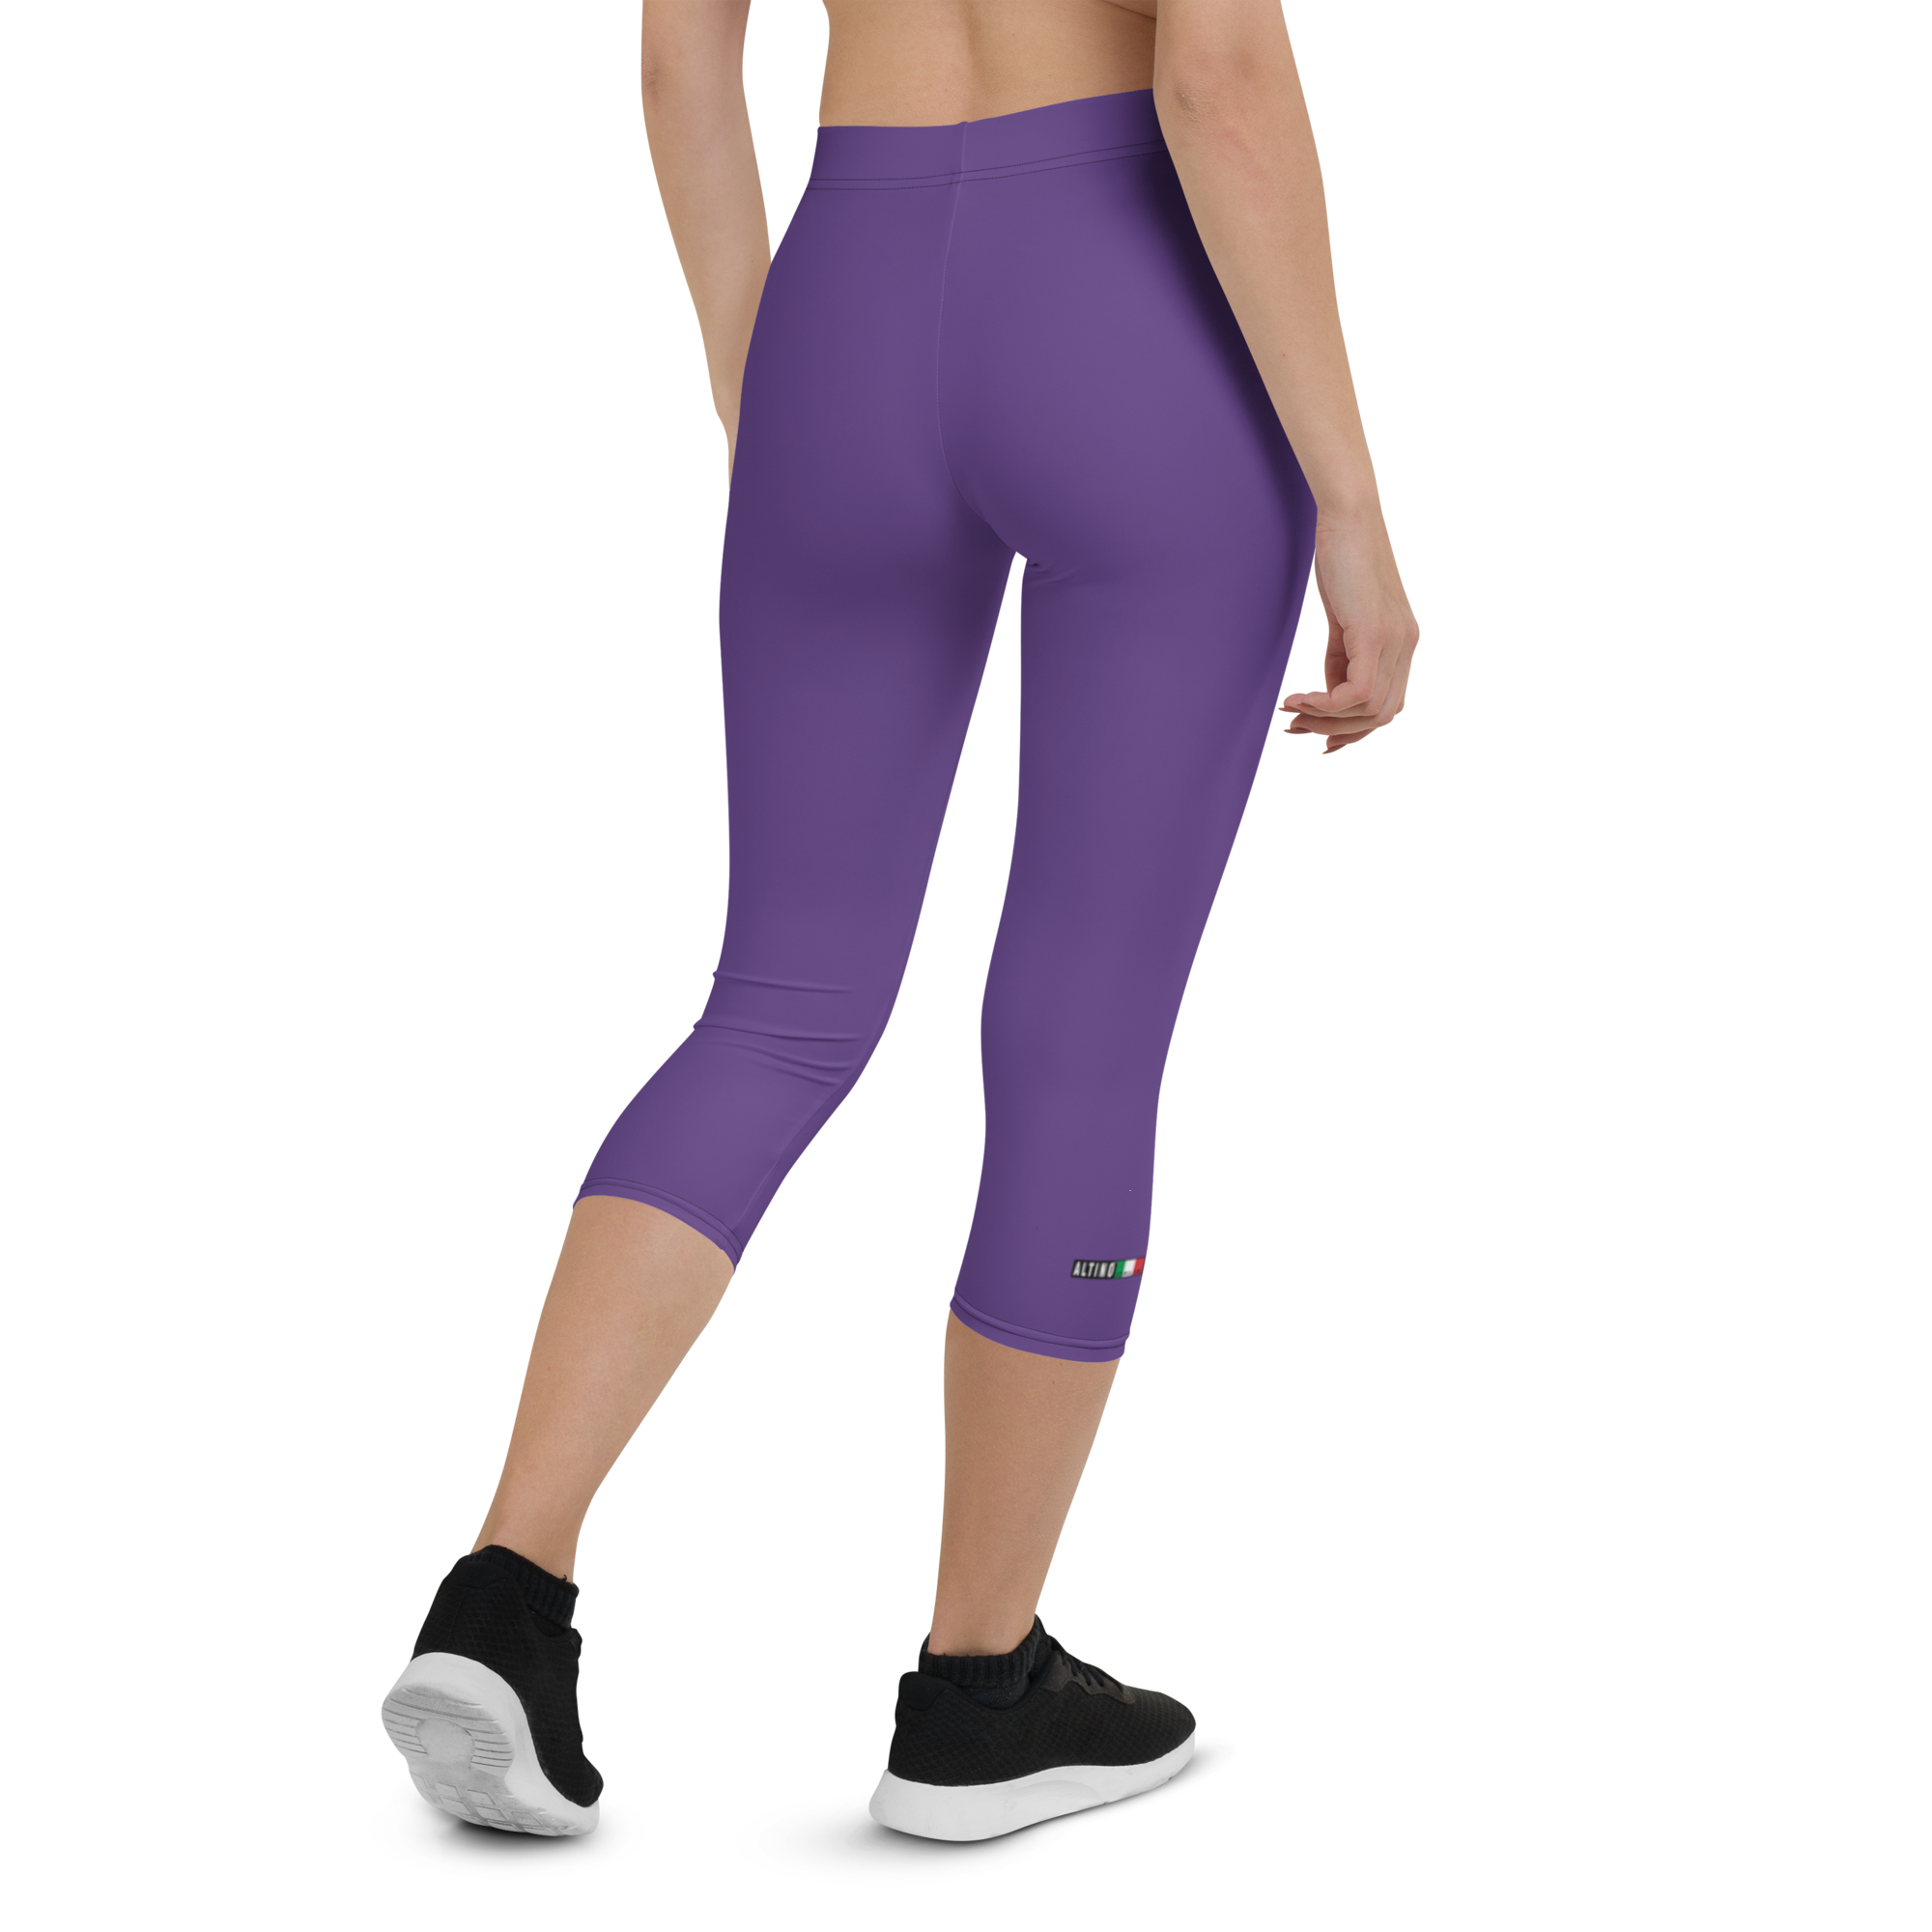 #35faa390 - ALTINO Capri - Summer Never Ends Collection - Yoga - Stop Plastic Packaging - #PlasticCops - Apparel - Accessories - Clothing For Girls - Women Pants